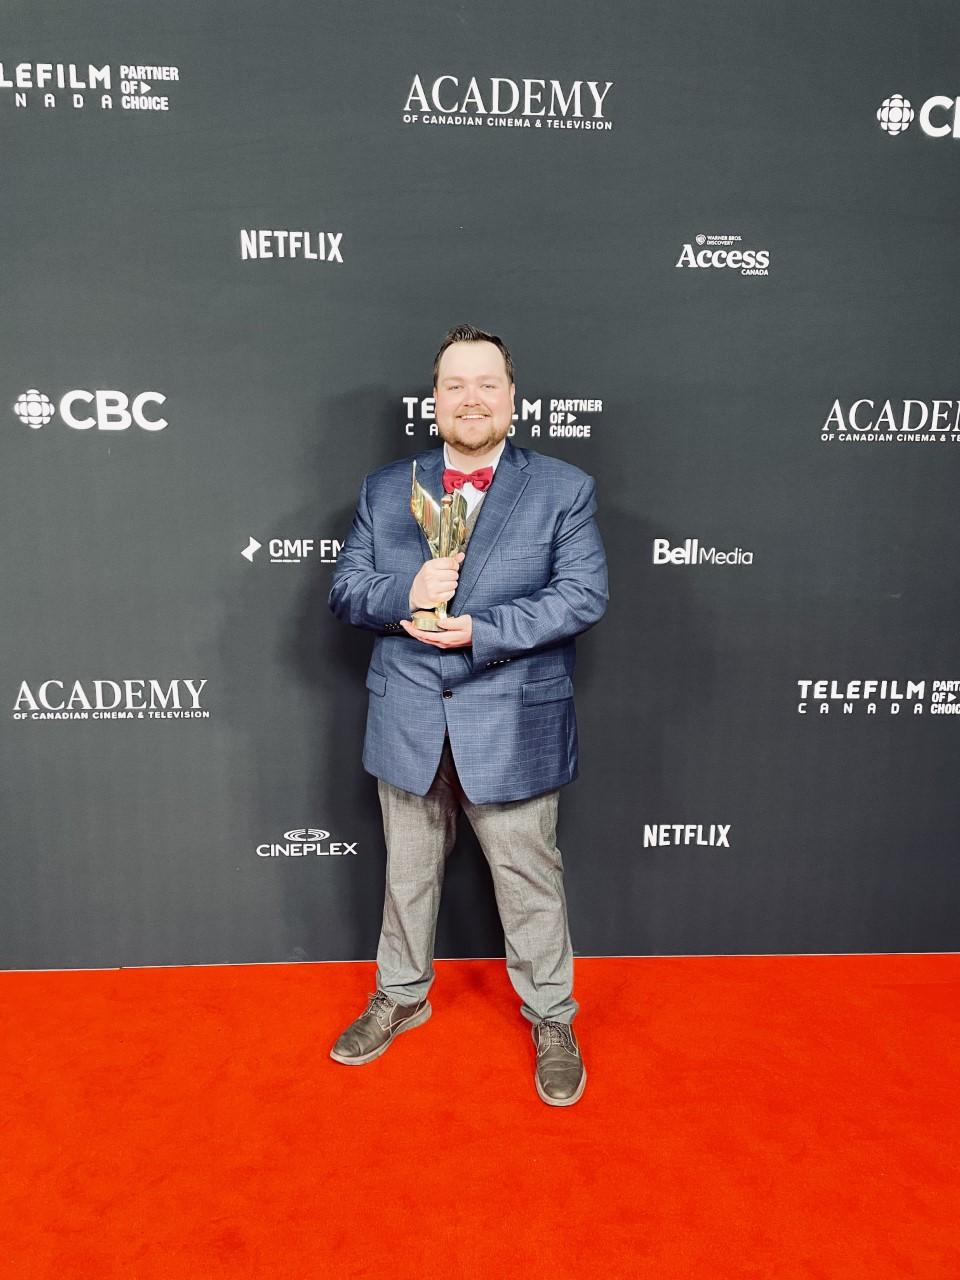 A person holding an award stands on a red carpet in front on a backdrop with writing on it.